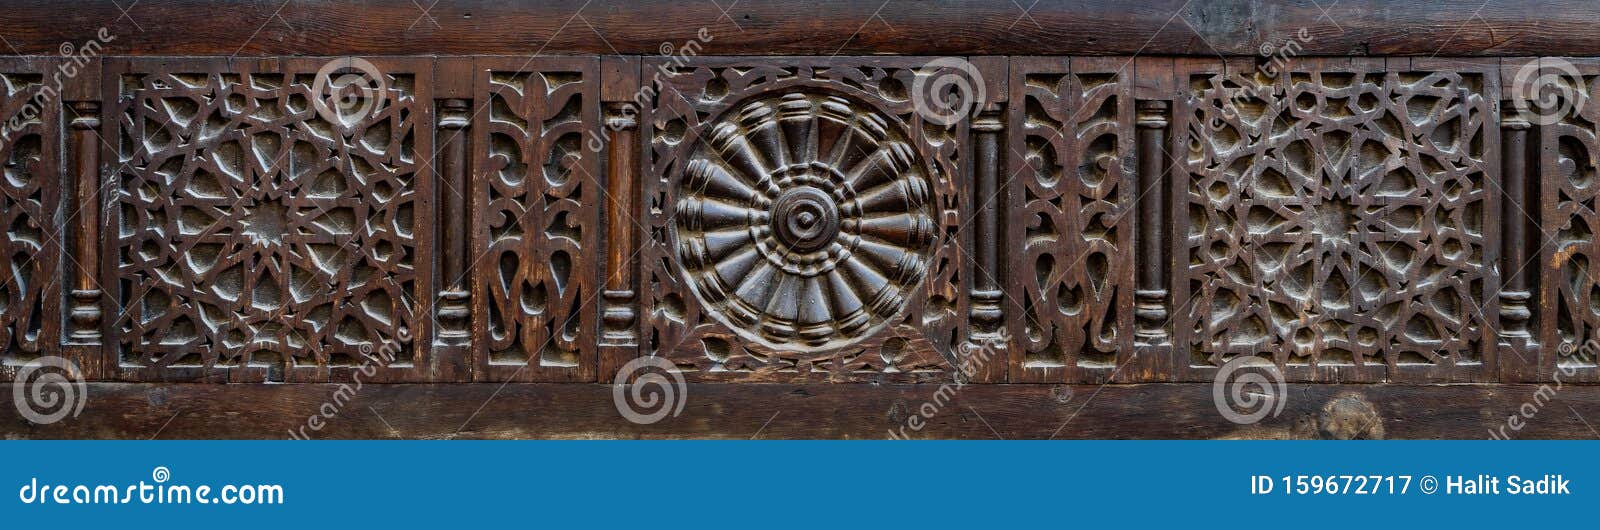 traditional interleaved wooden decorated arabesque unit, old cairo, egypt